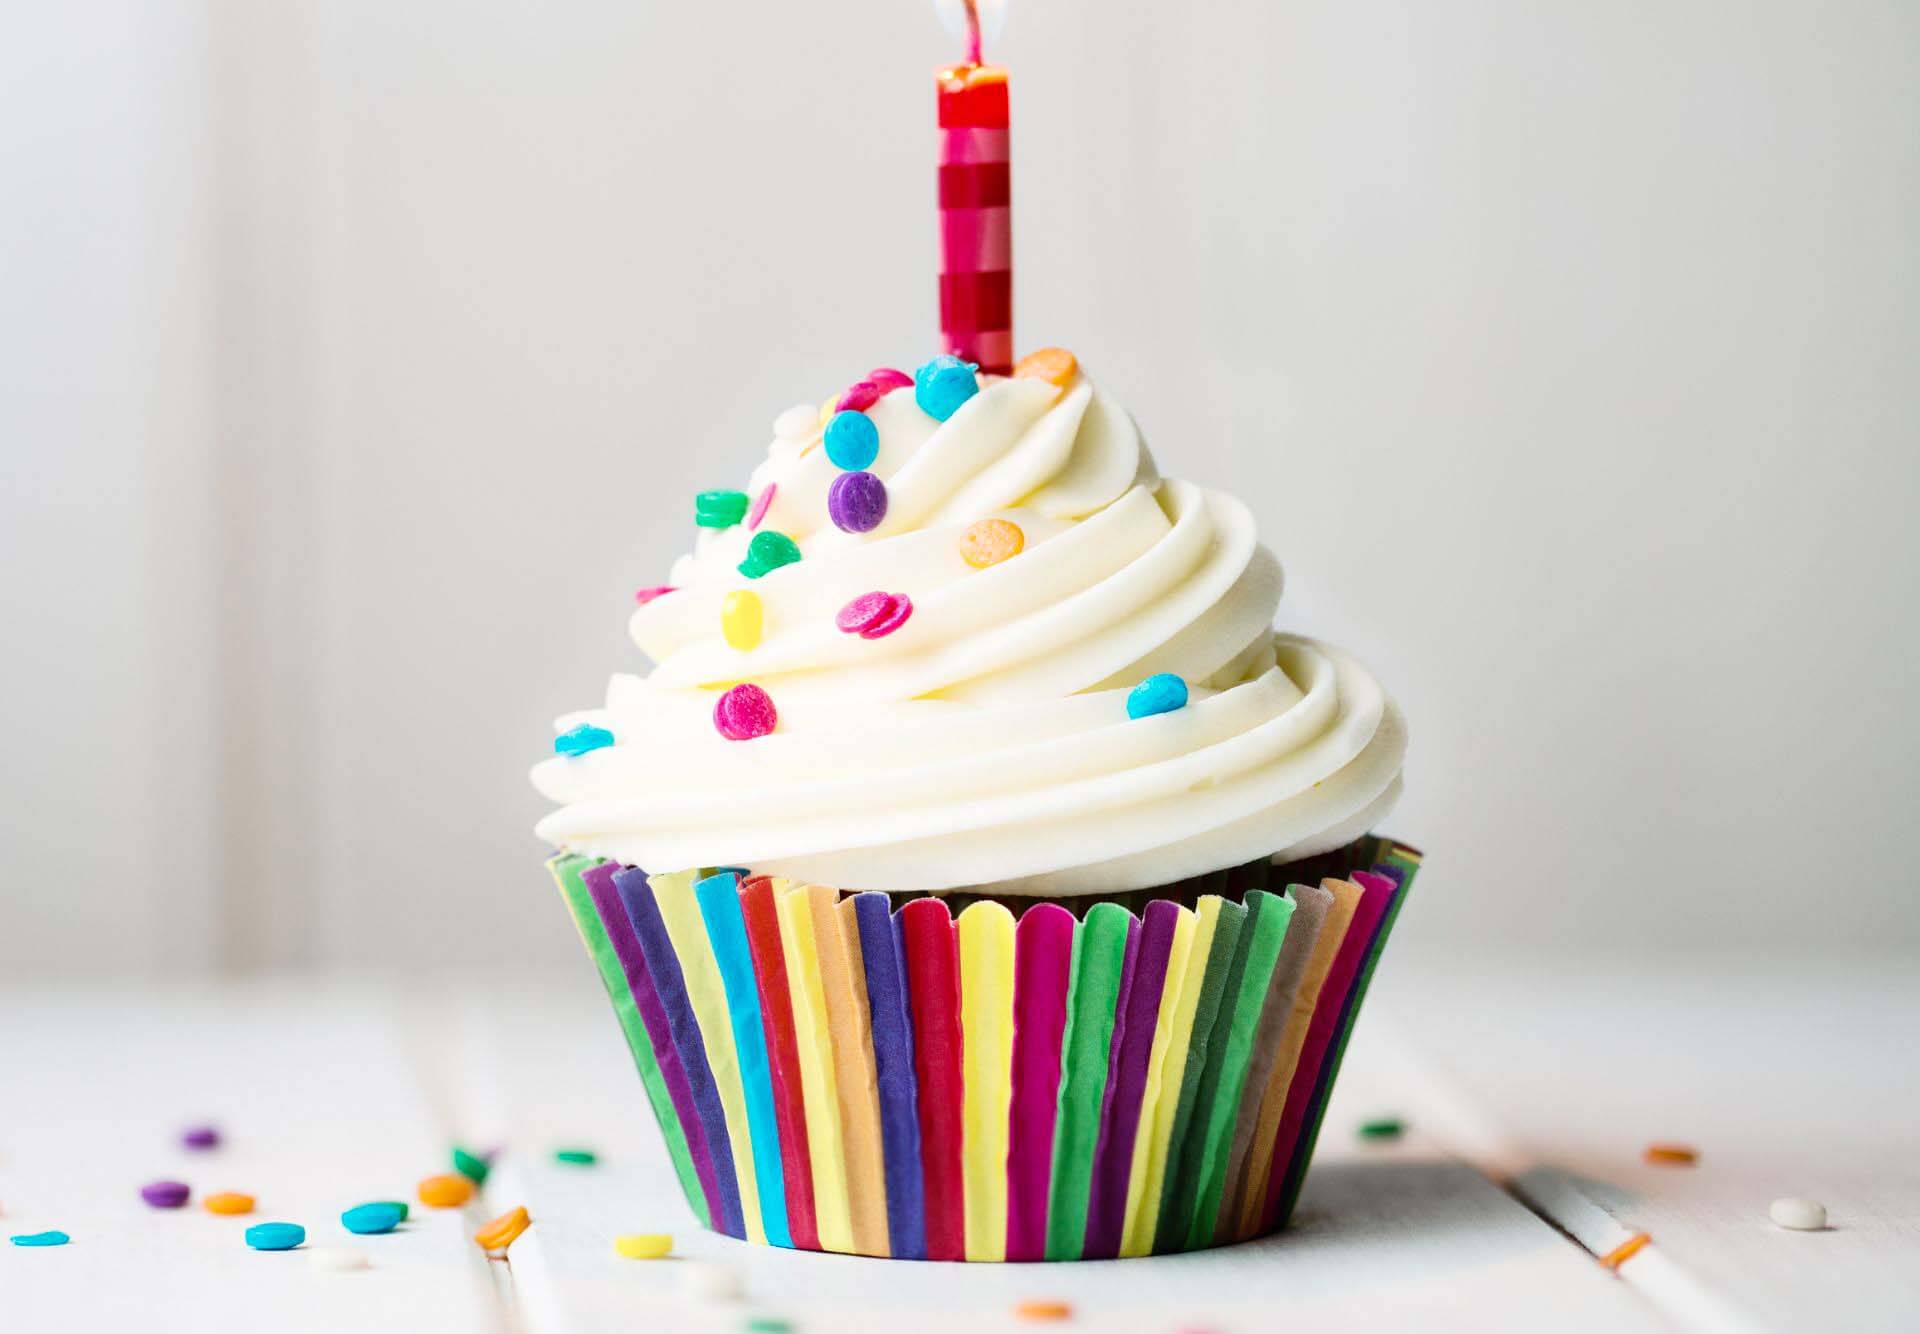 The Most and Least Common Birthdays